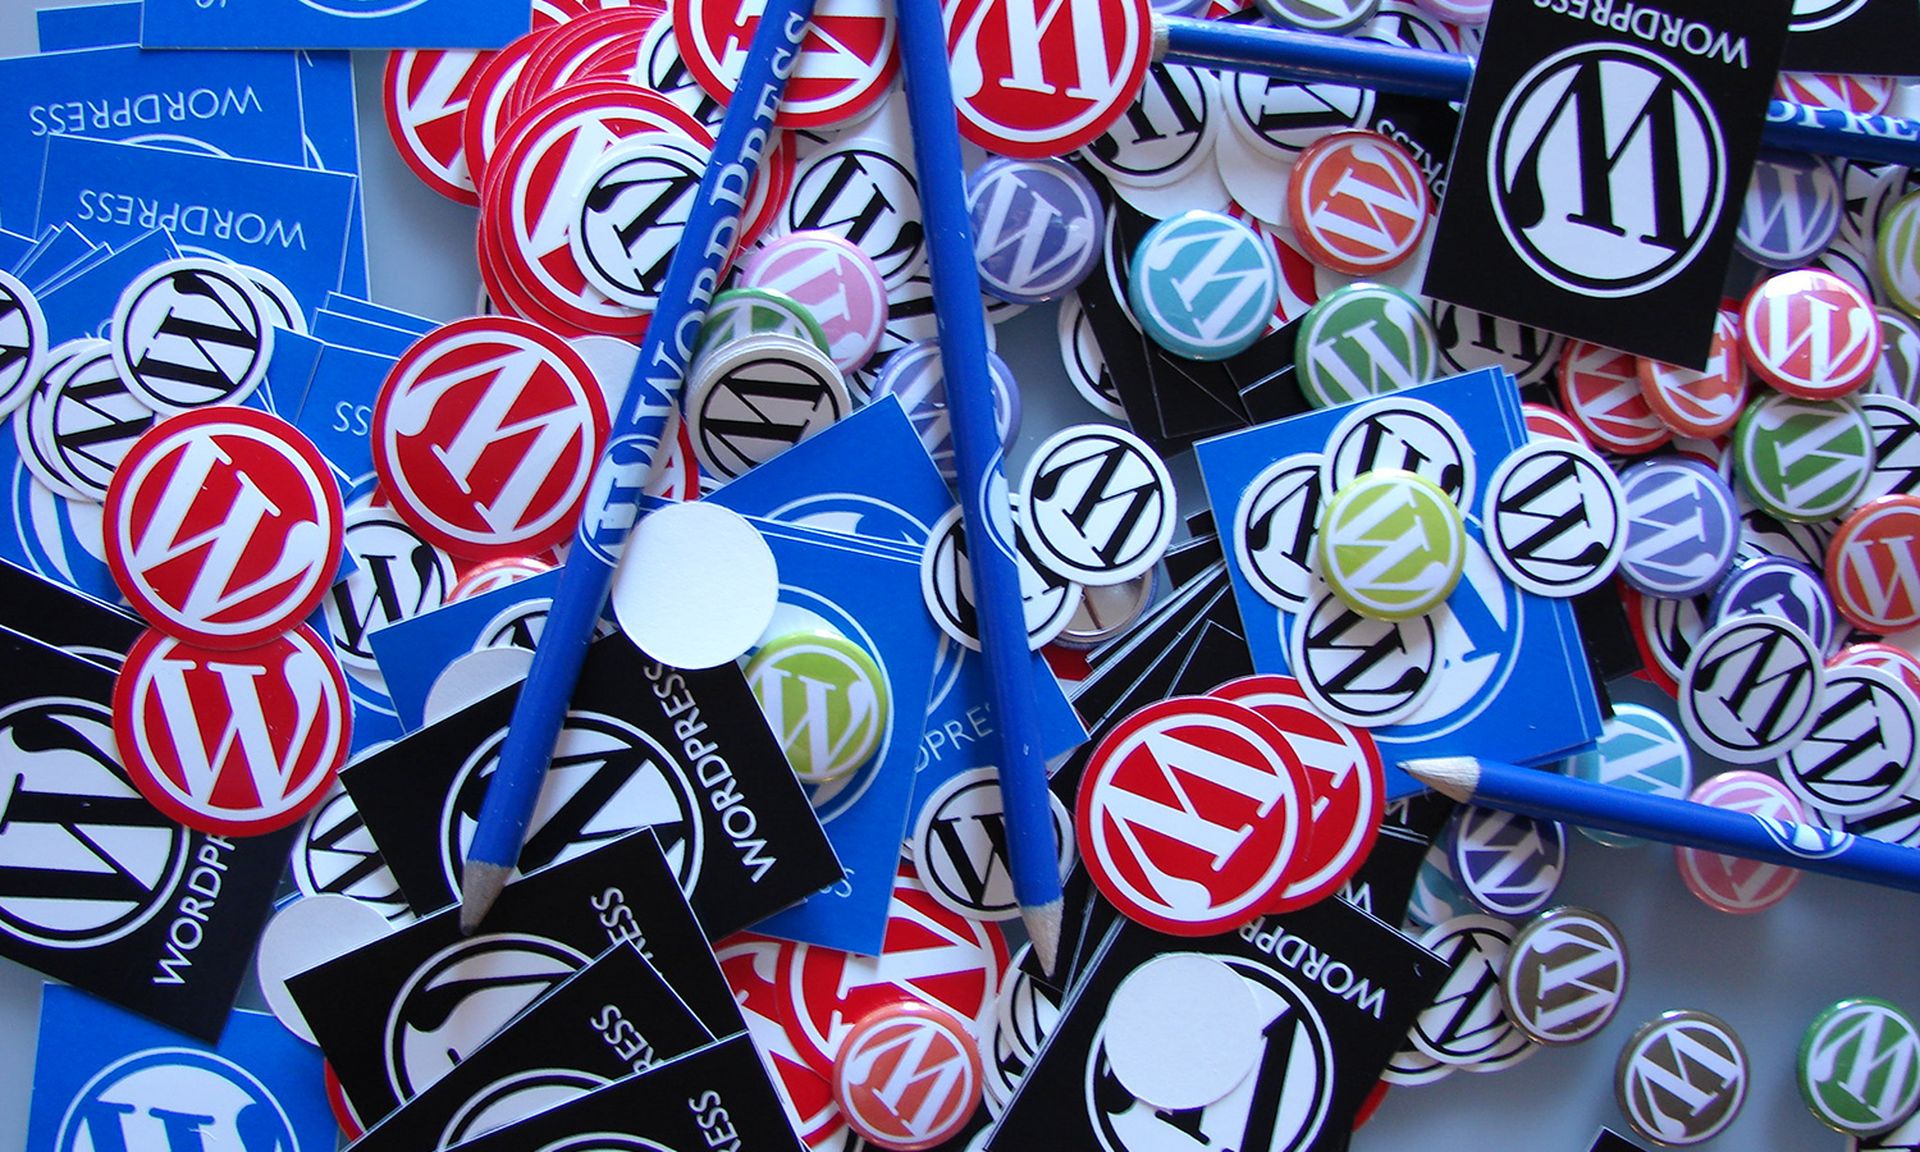 Stickers, buttons and pencils with the WordPress logo are seen in a pile.